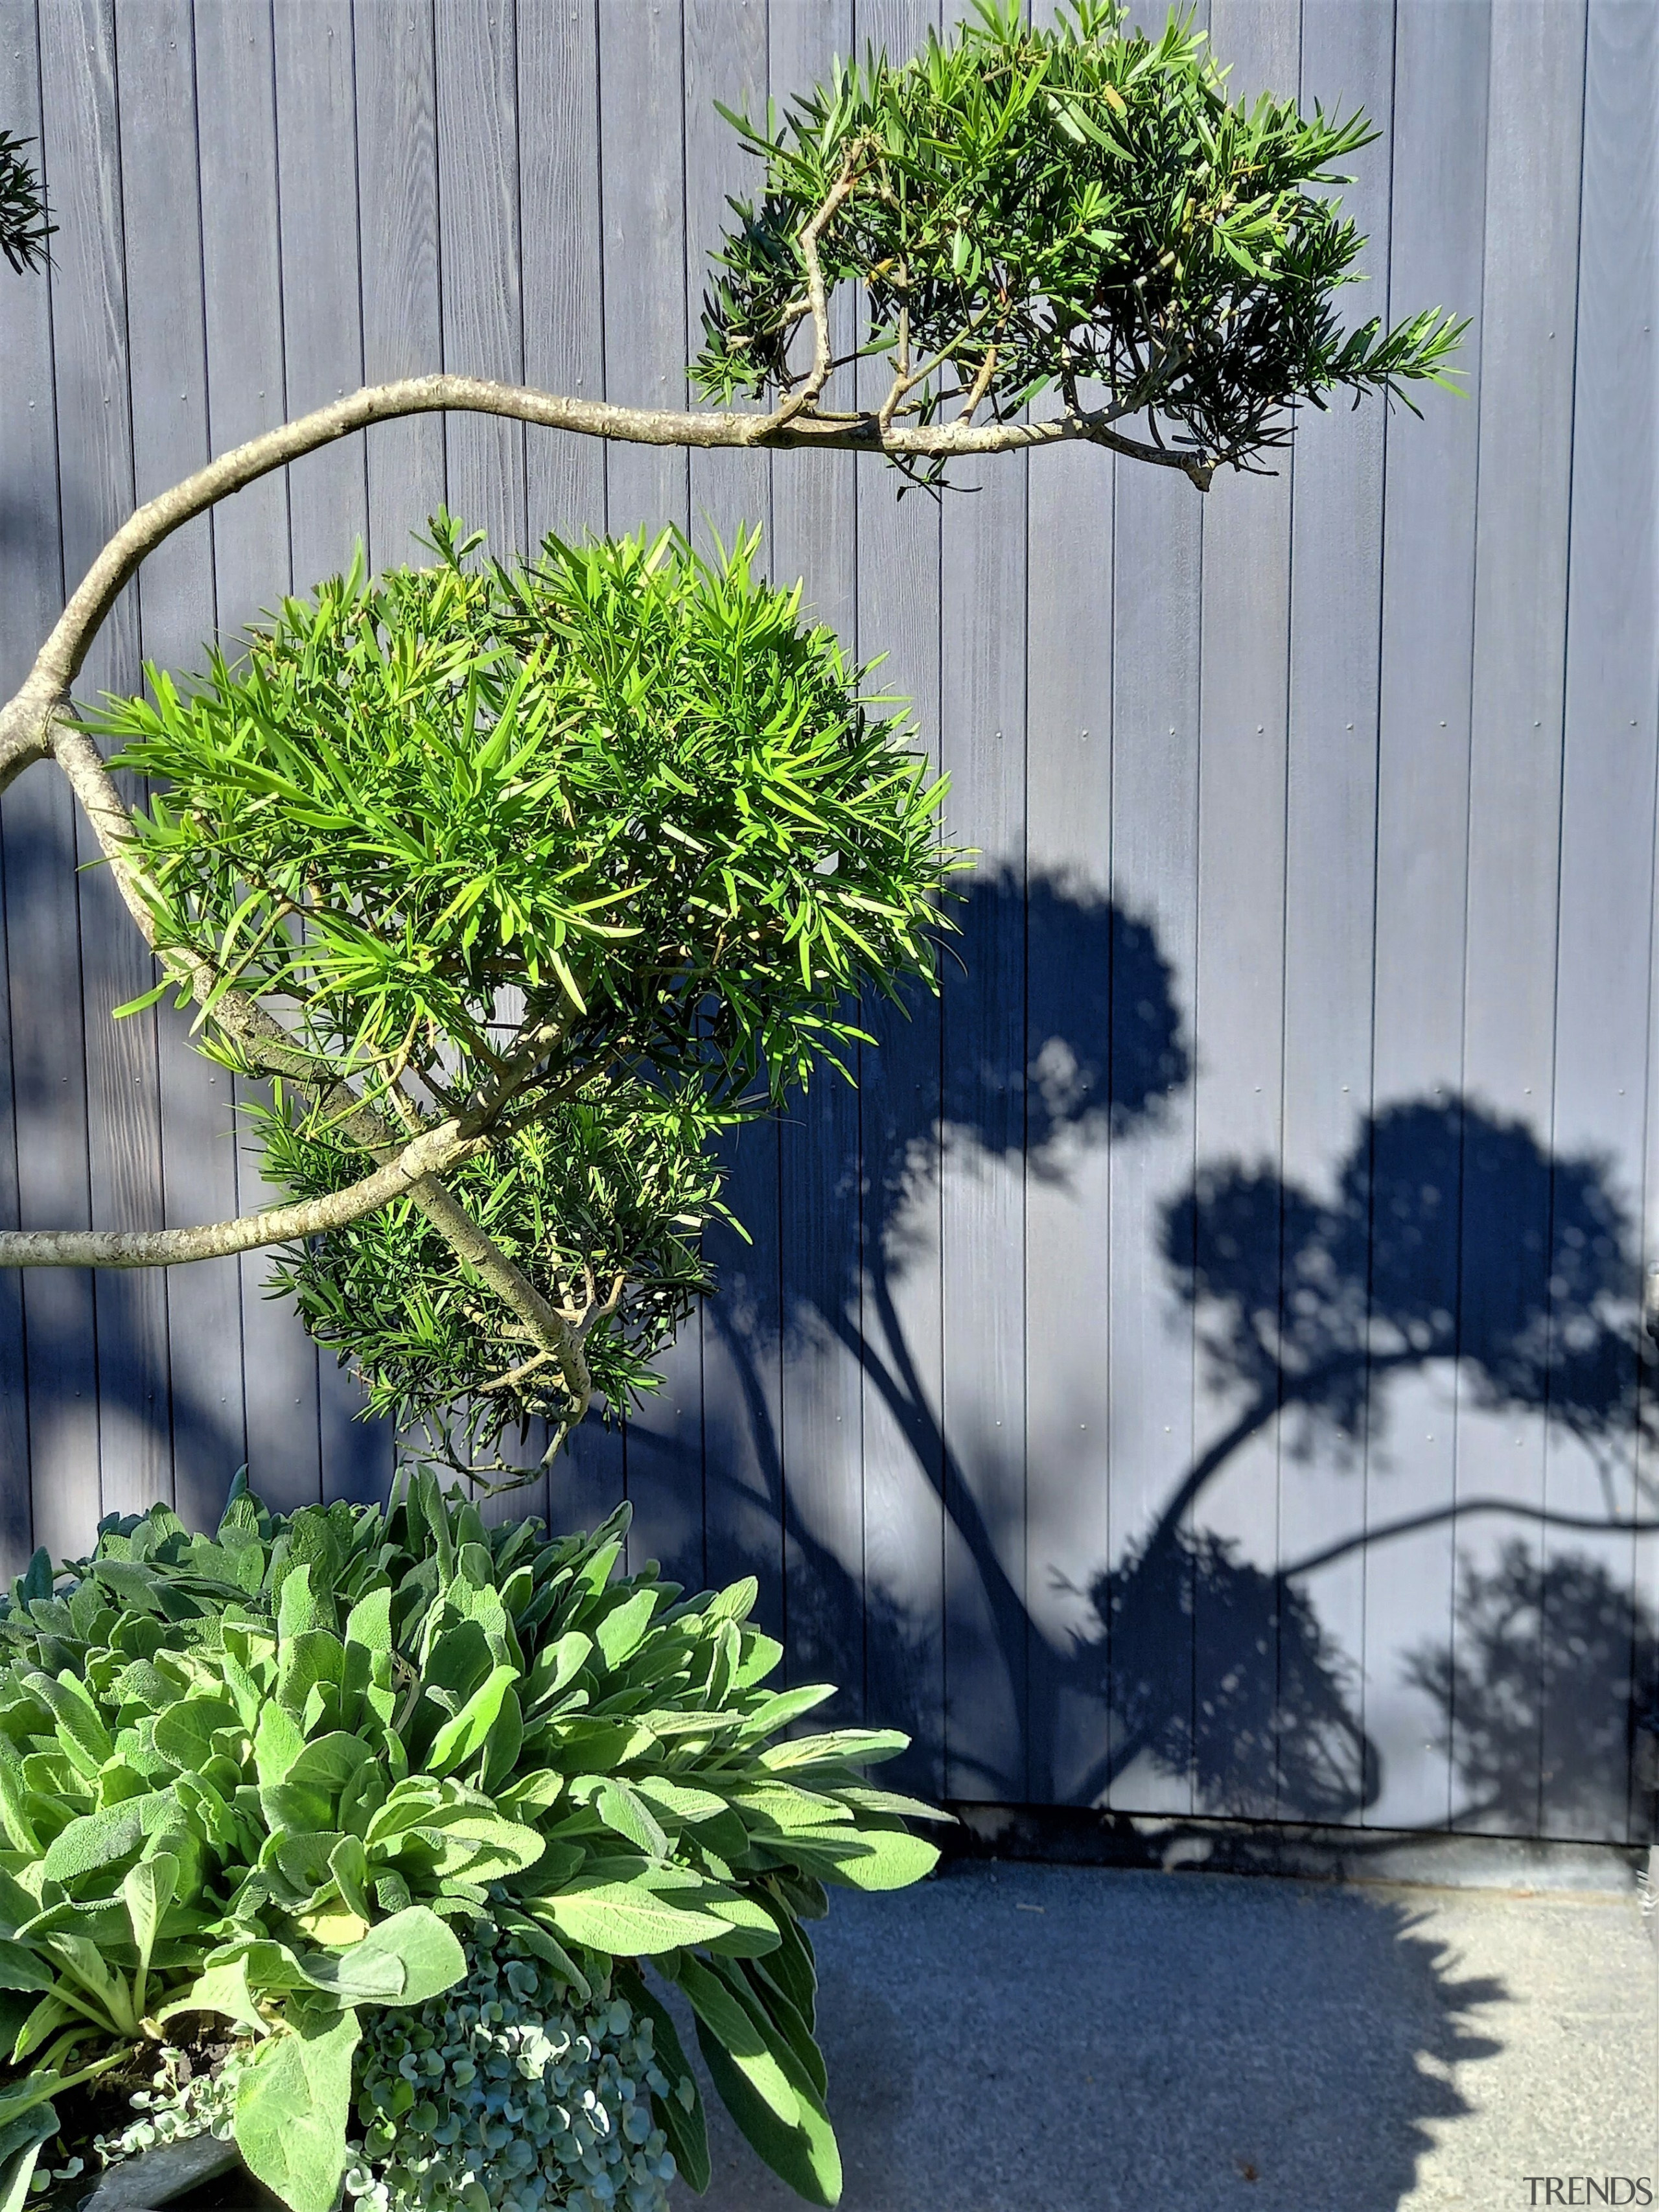 Shadow is a magical element in the garden 